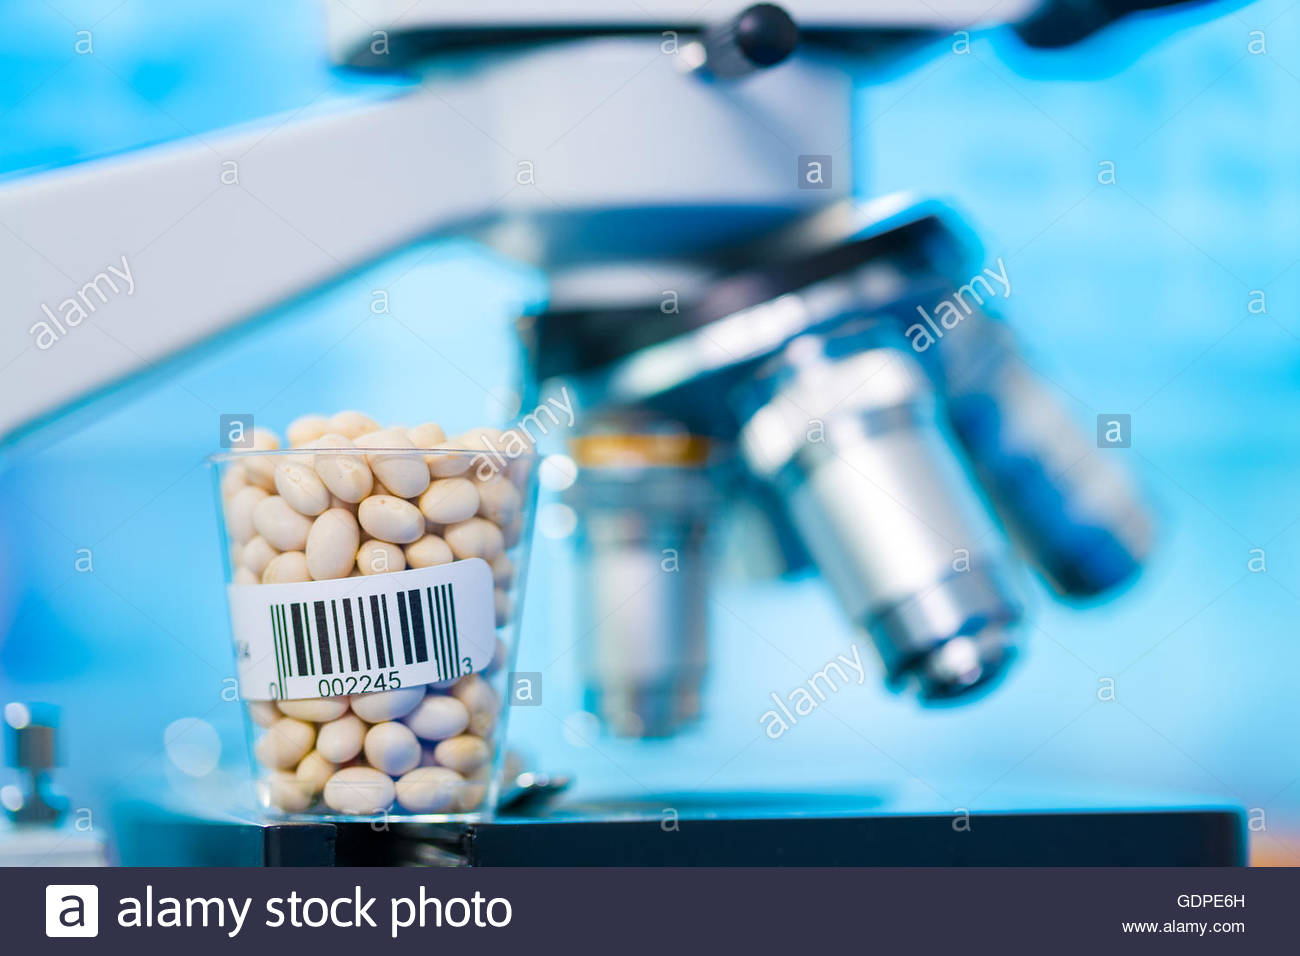 Beans In Laboratory Microscope Background Stock Photo